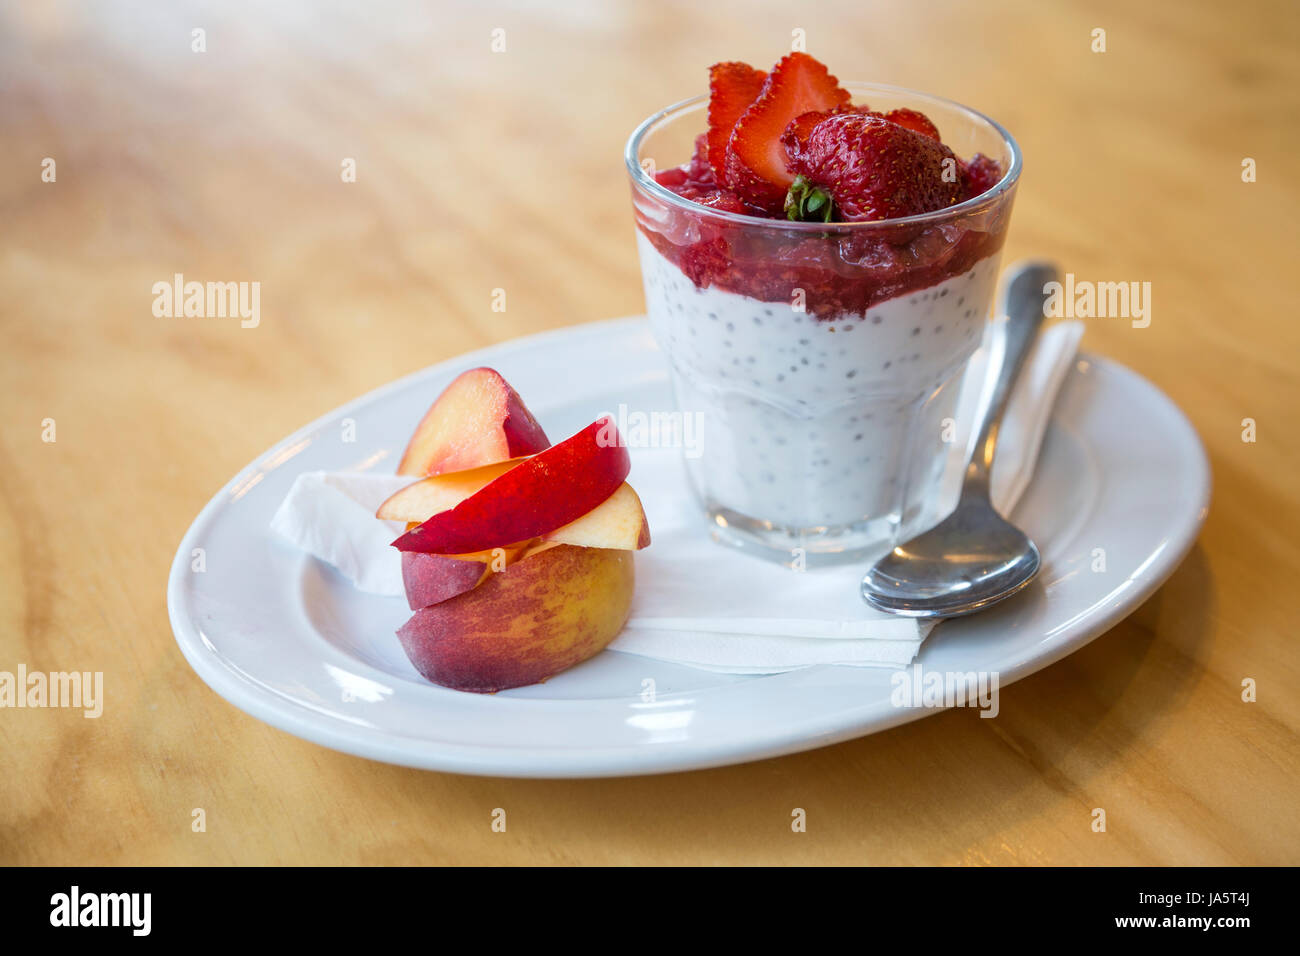 Chia seed pudding with fruit - peaches, strawberries (New Zealand) Stock Photo